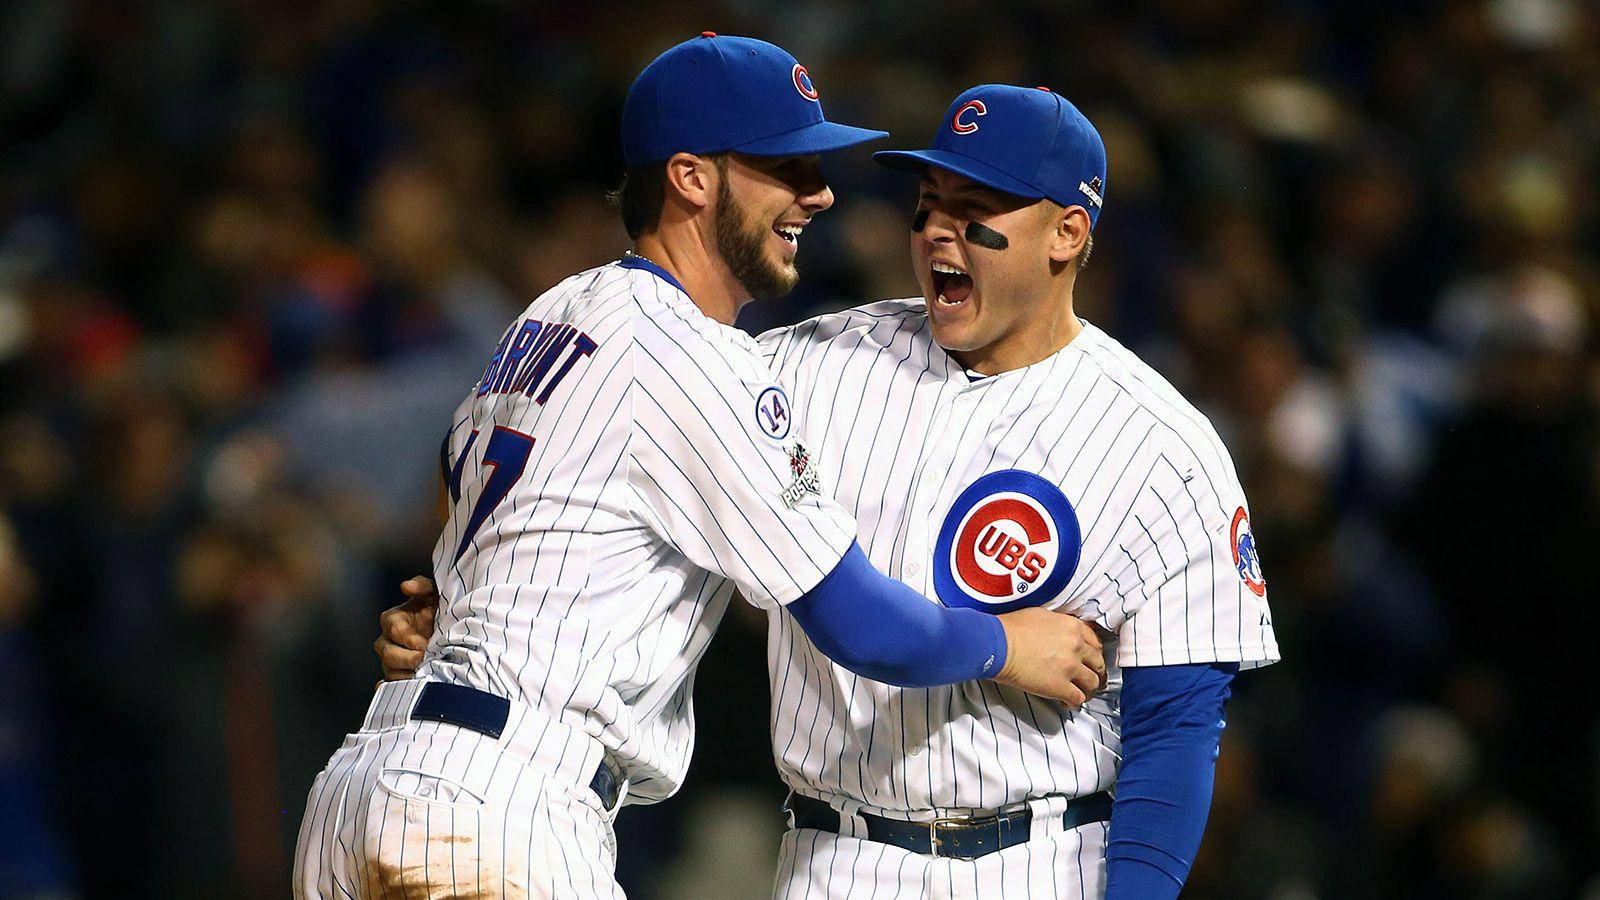 Anthonyrizzo Bryant Firar (celebrate) - As A Wallpaper Slogan For Celebrating The Iconic Duo Of Baseball Players, Anthony Rizzo And Kris Bryant. Wallpaper